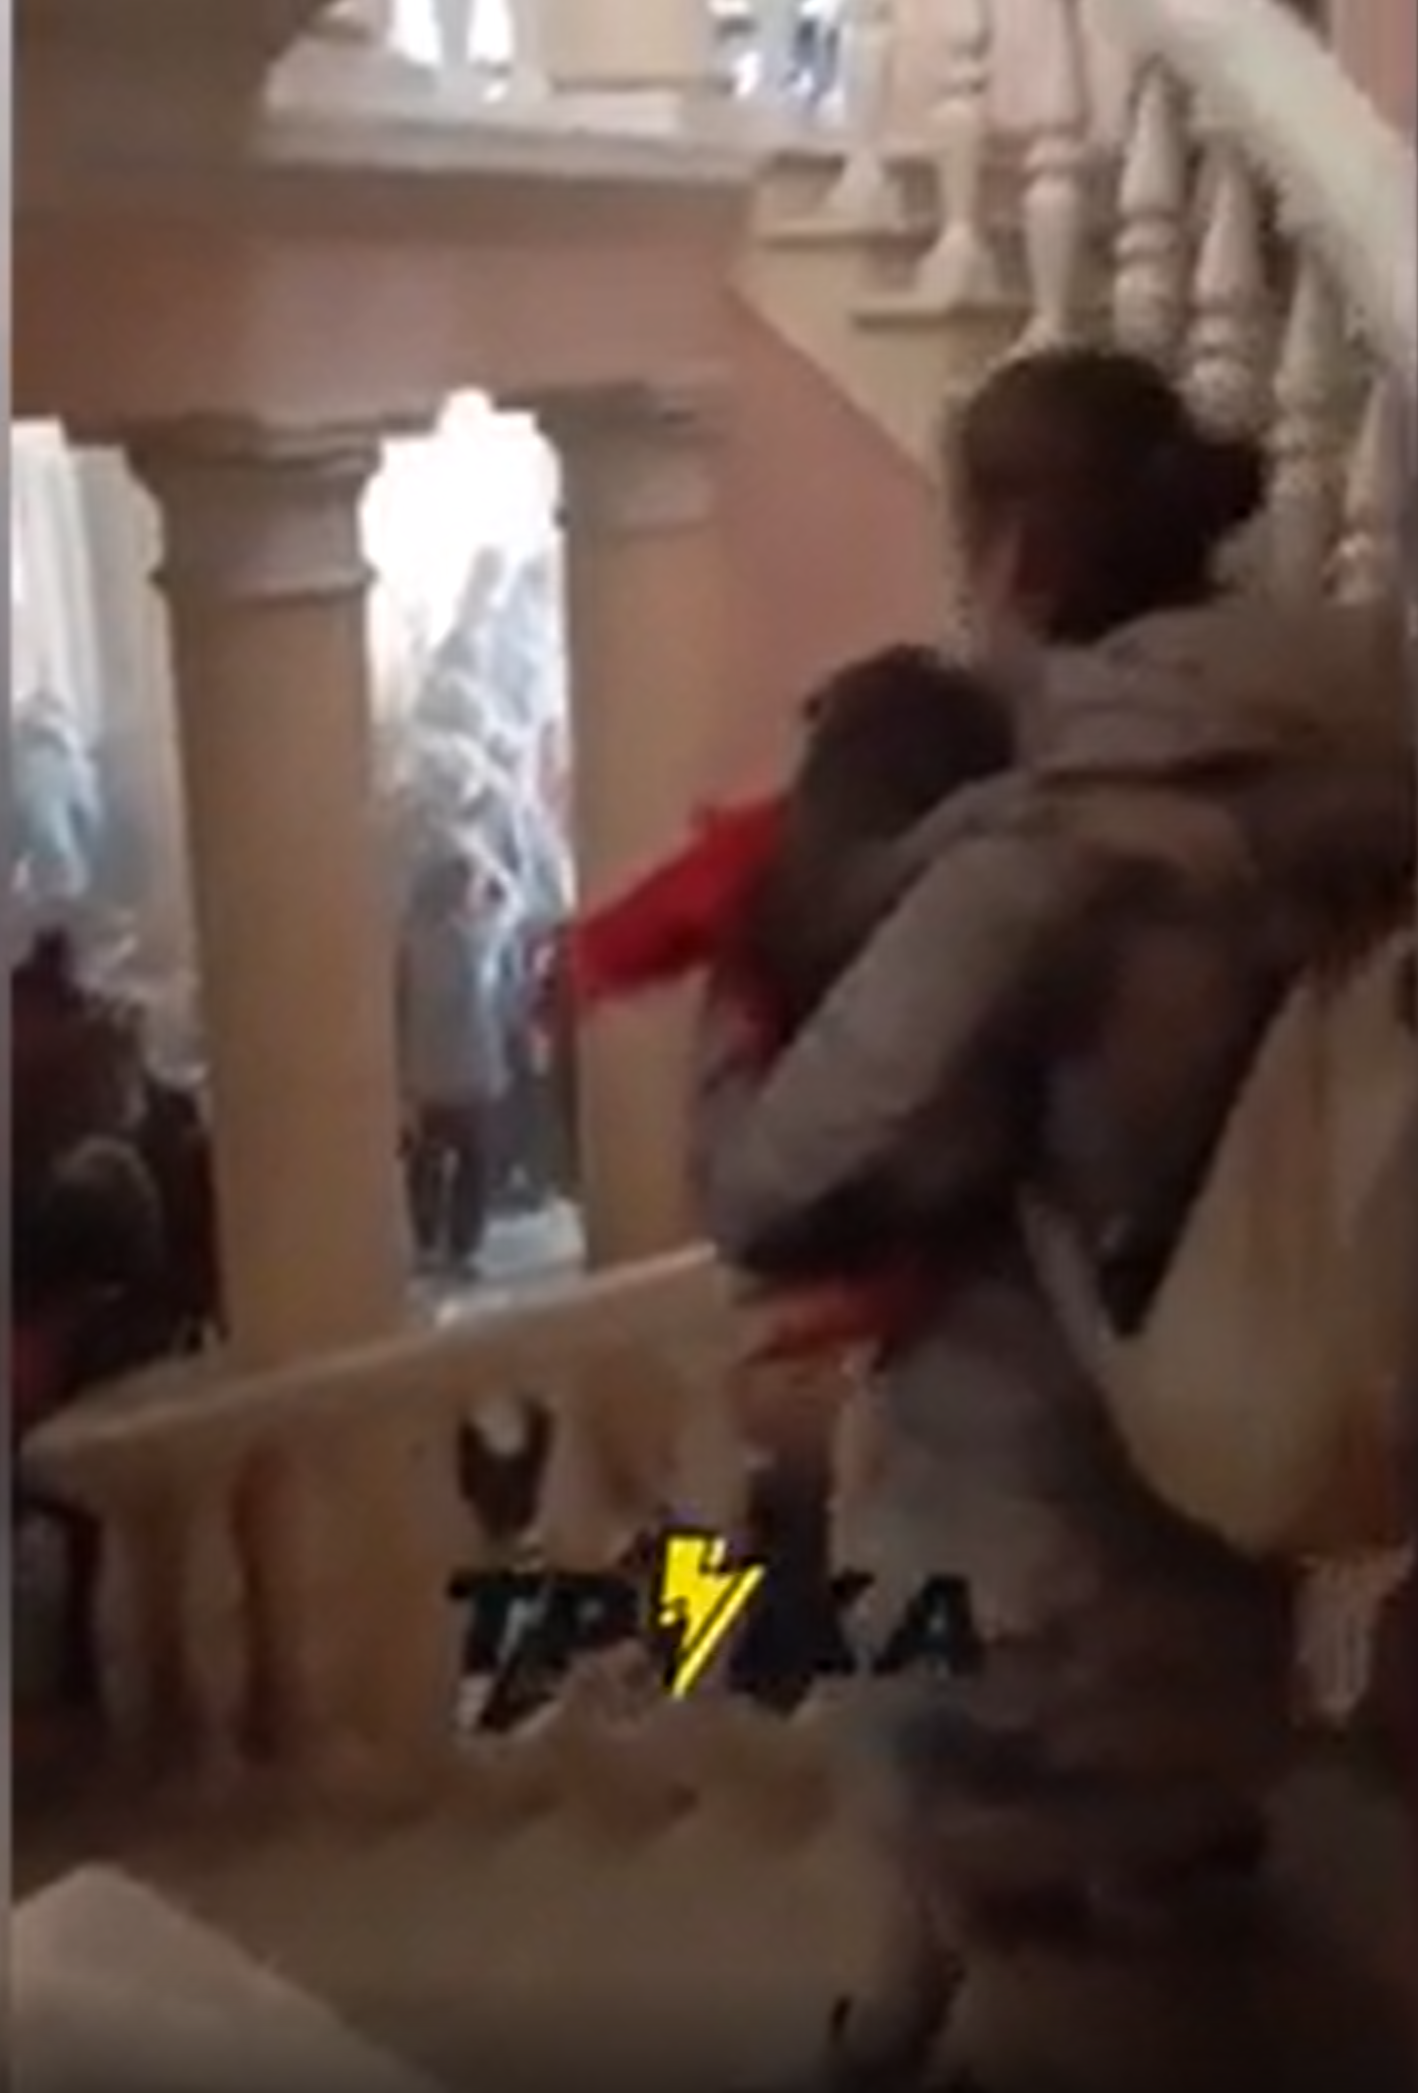 Women and small children could be seen evacuating the building